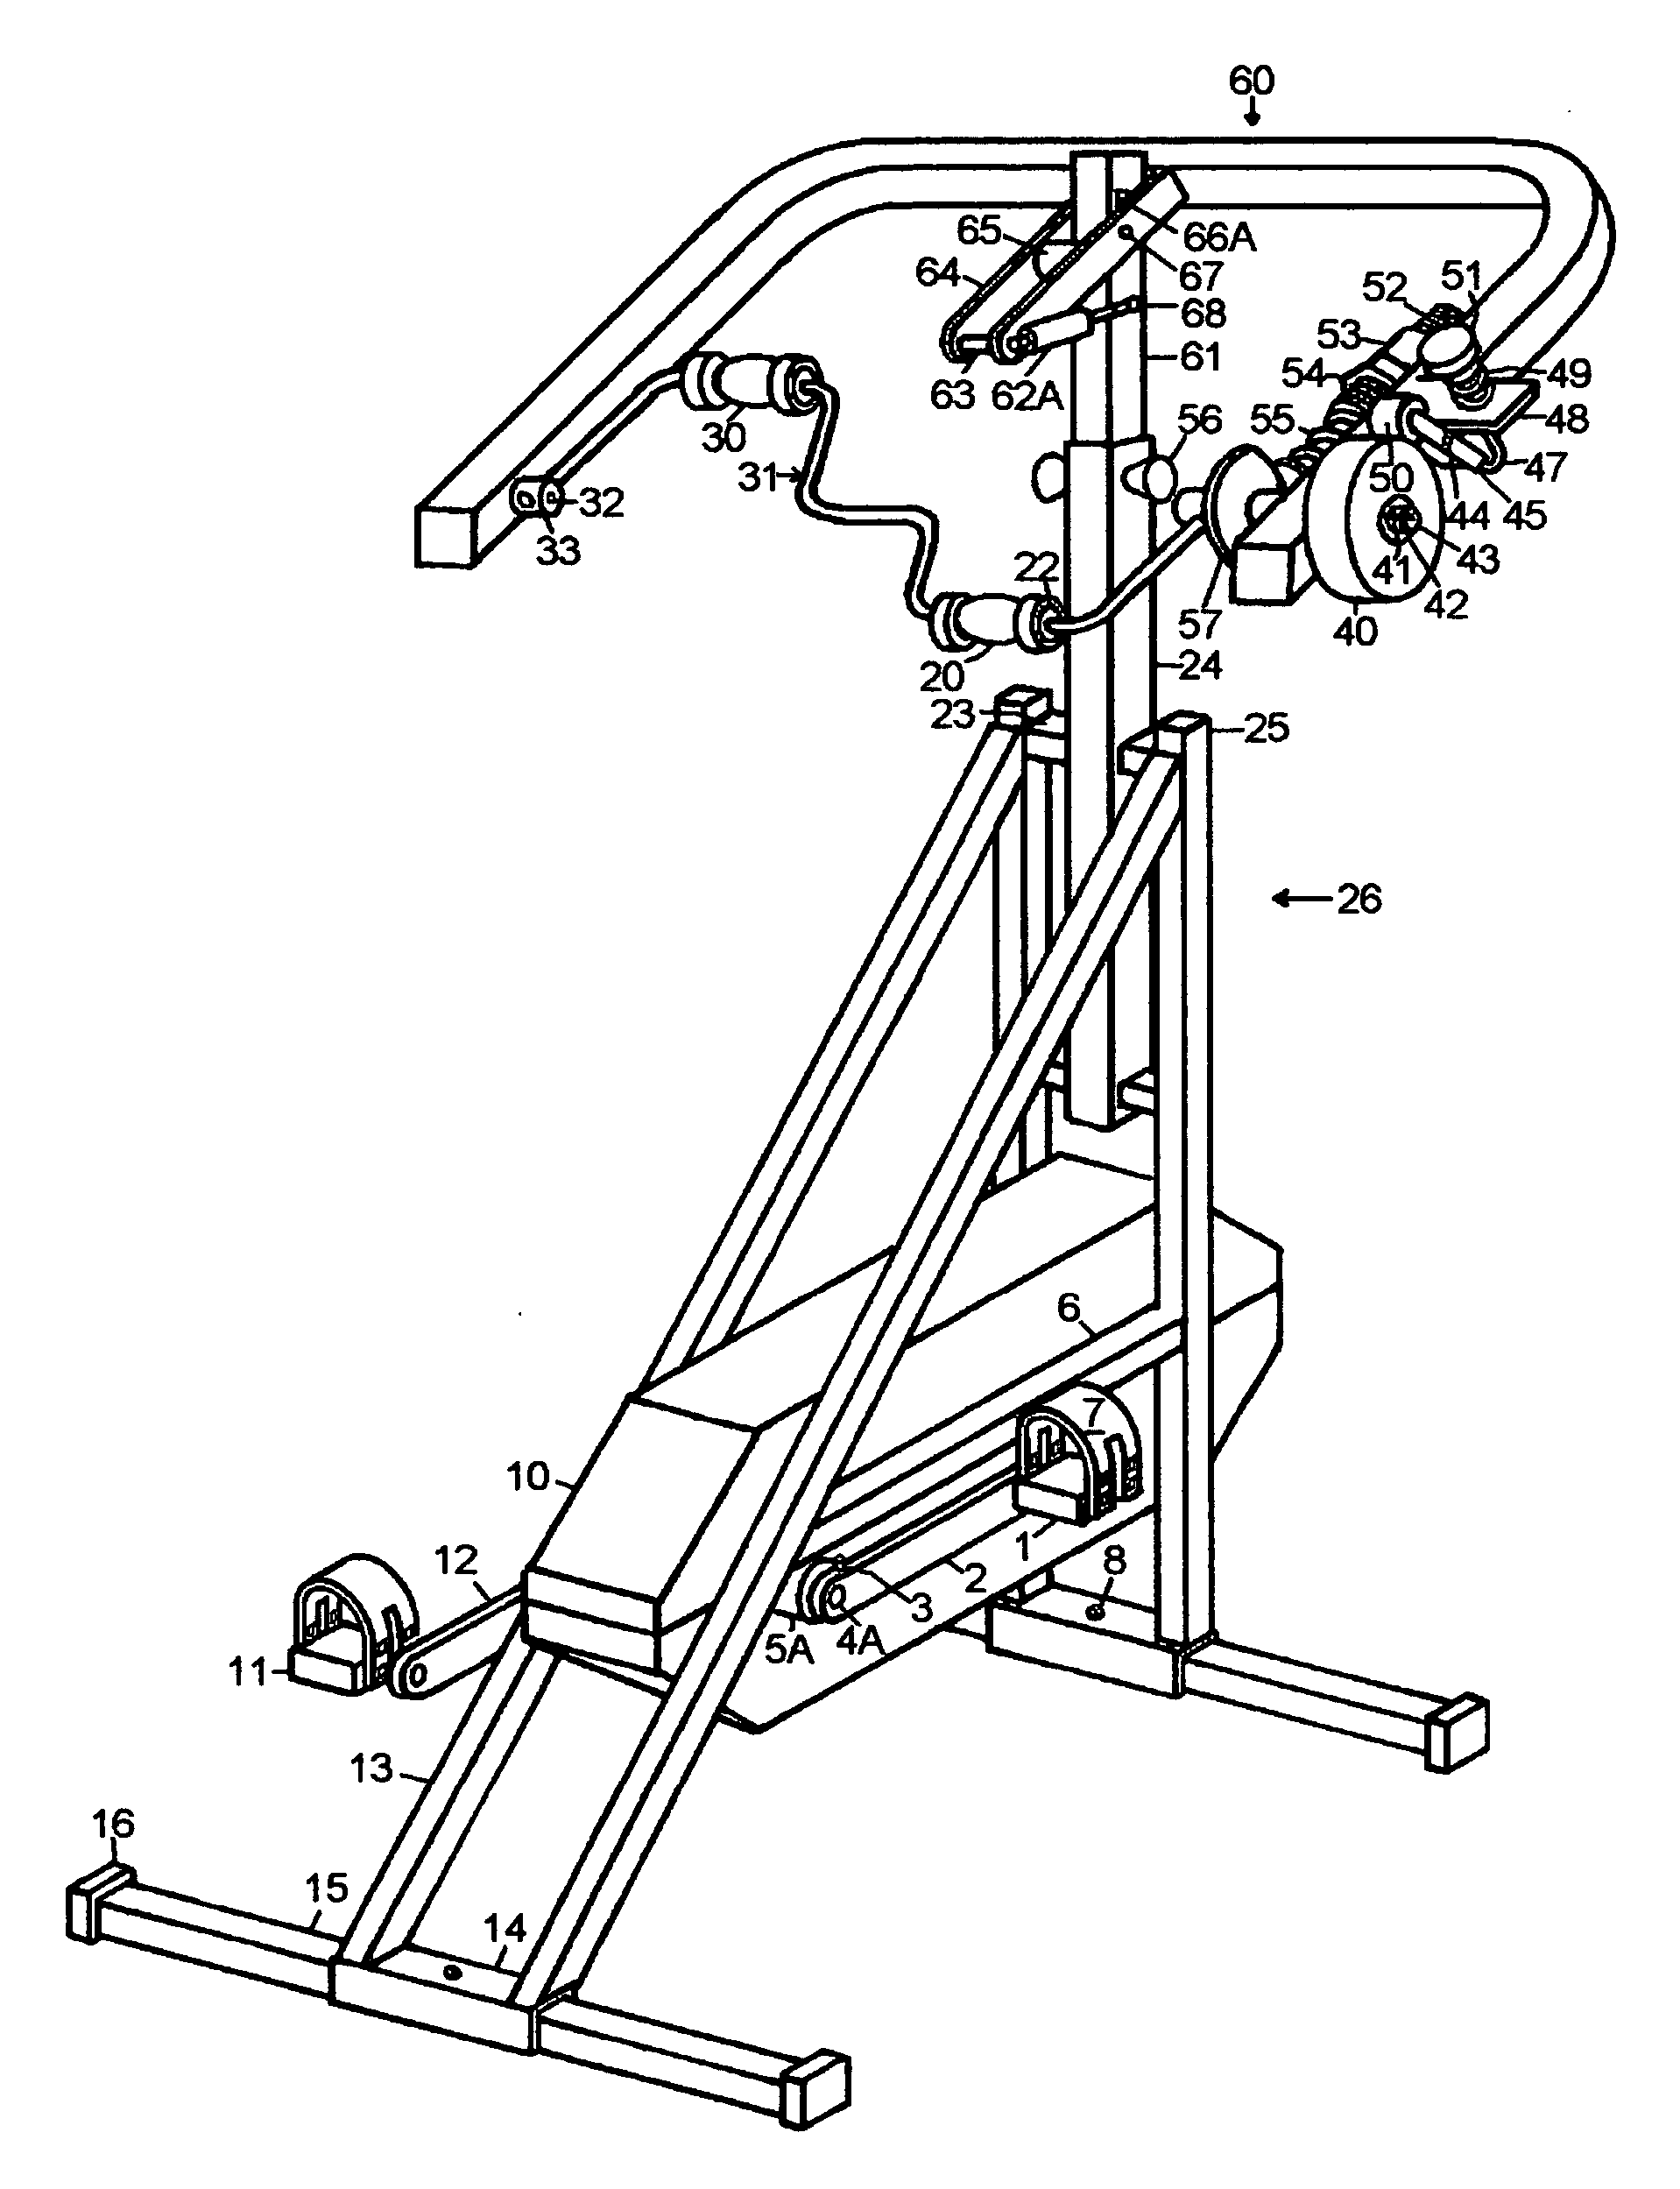 Vertical total body exercise apparatus